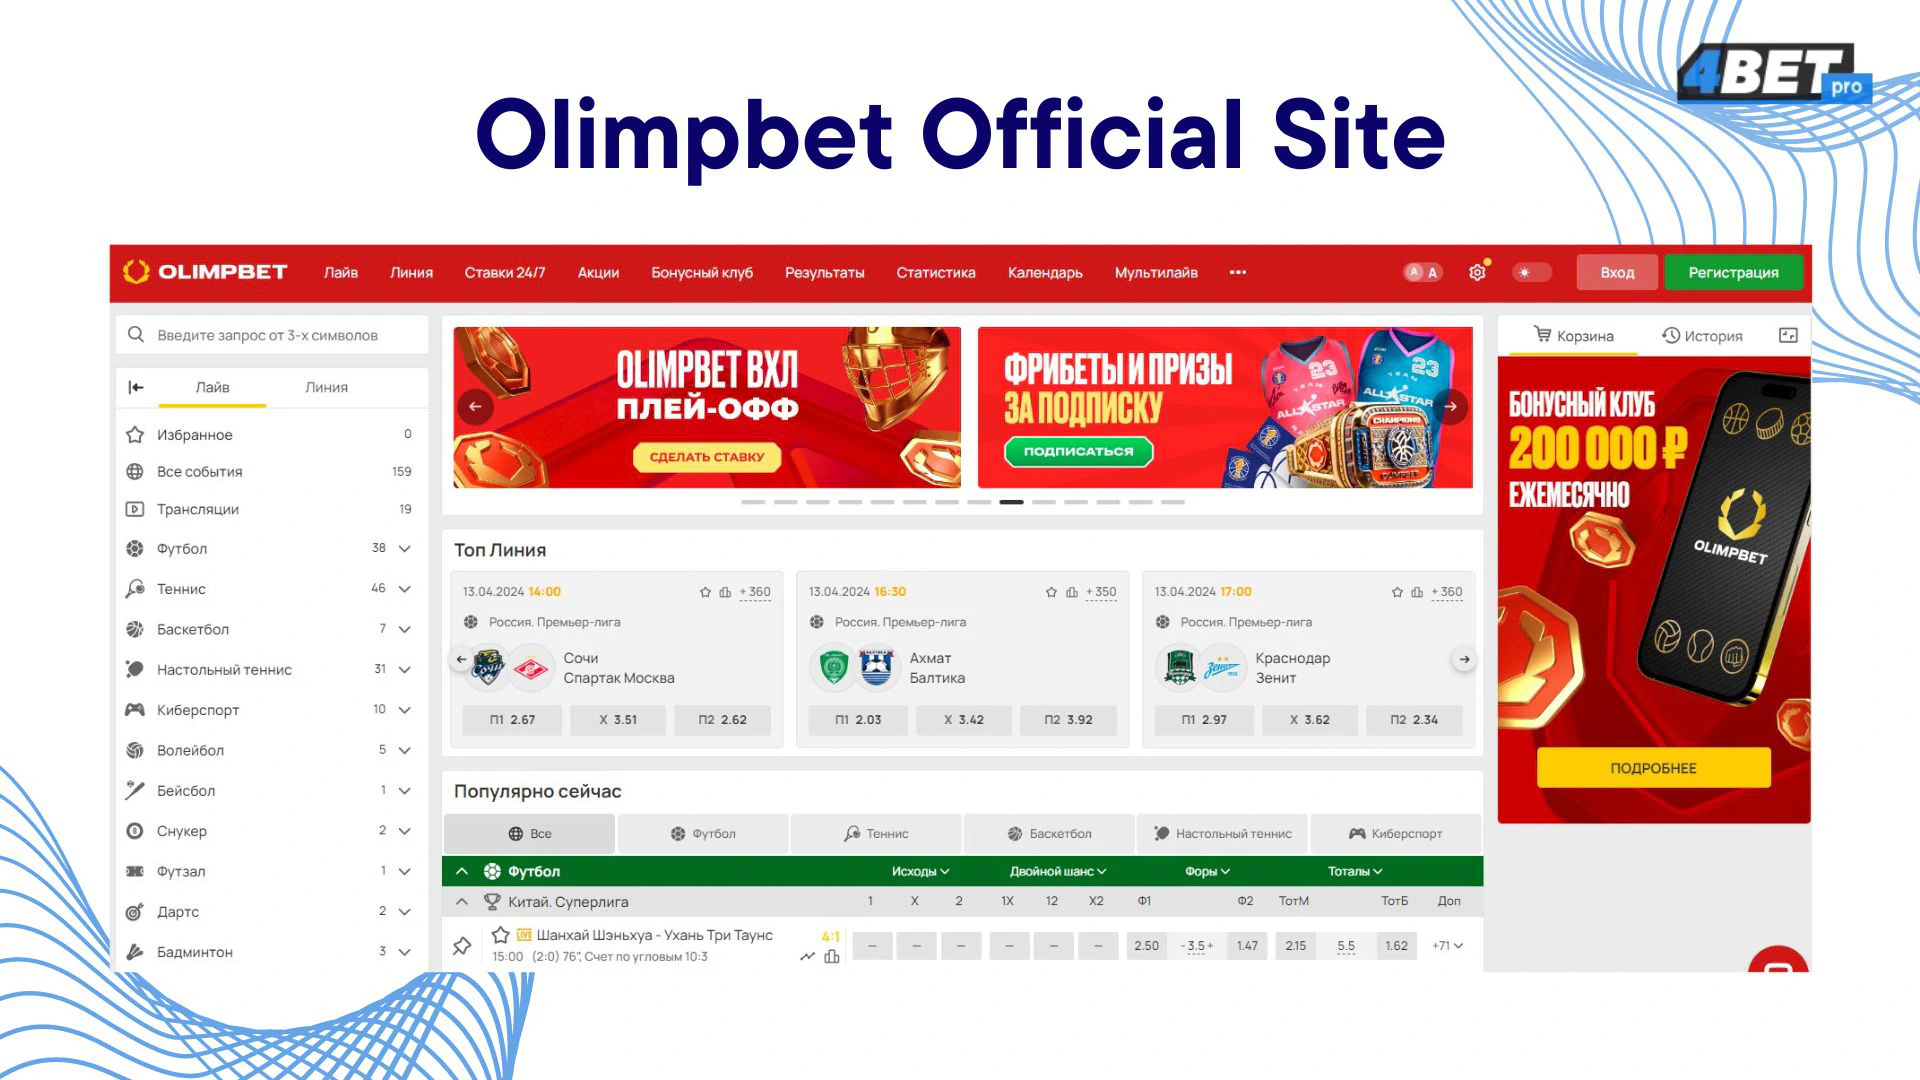 Olimpbet official site